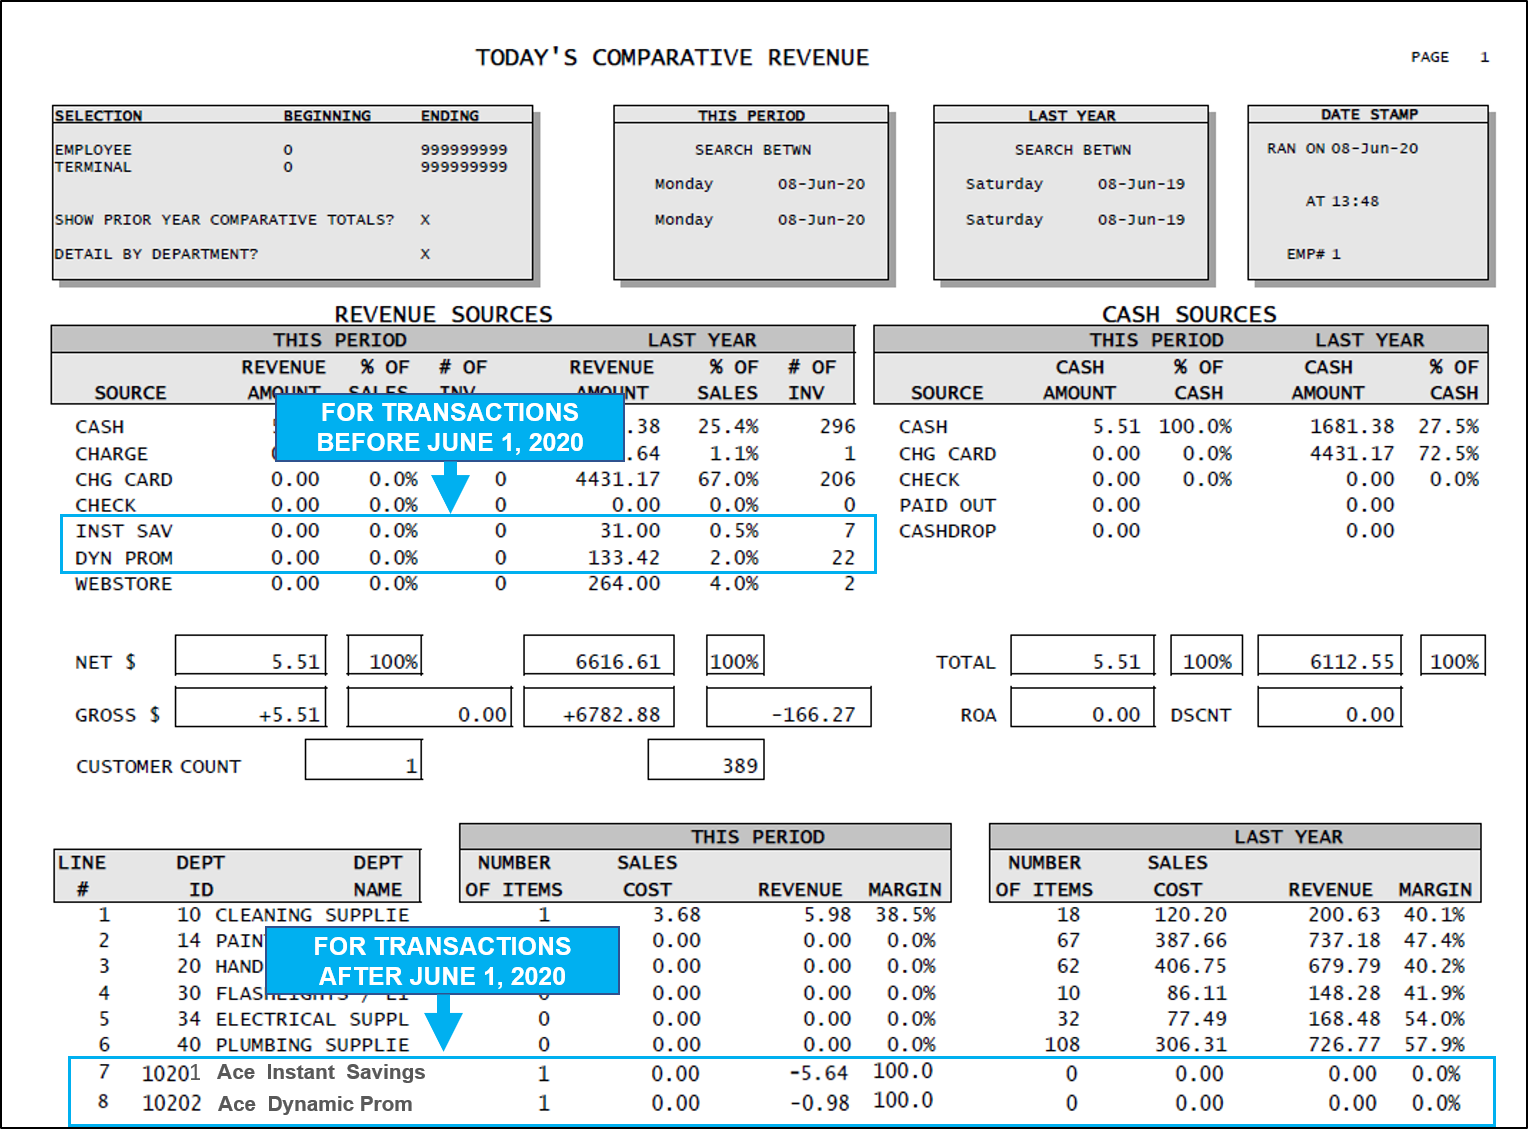 accounting change in the Comparative Revenue Report screenshot